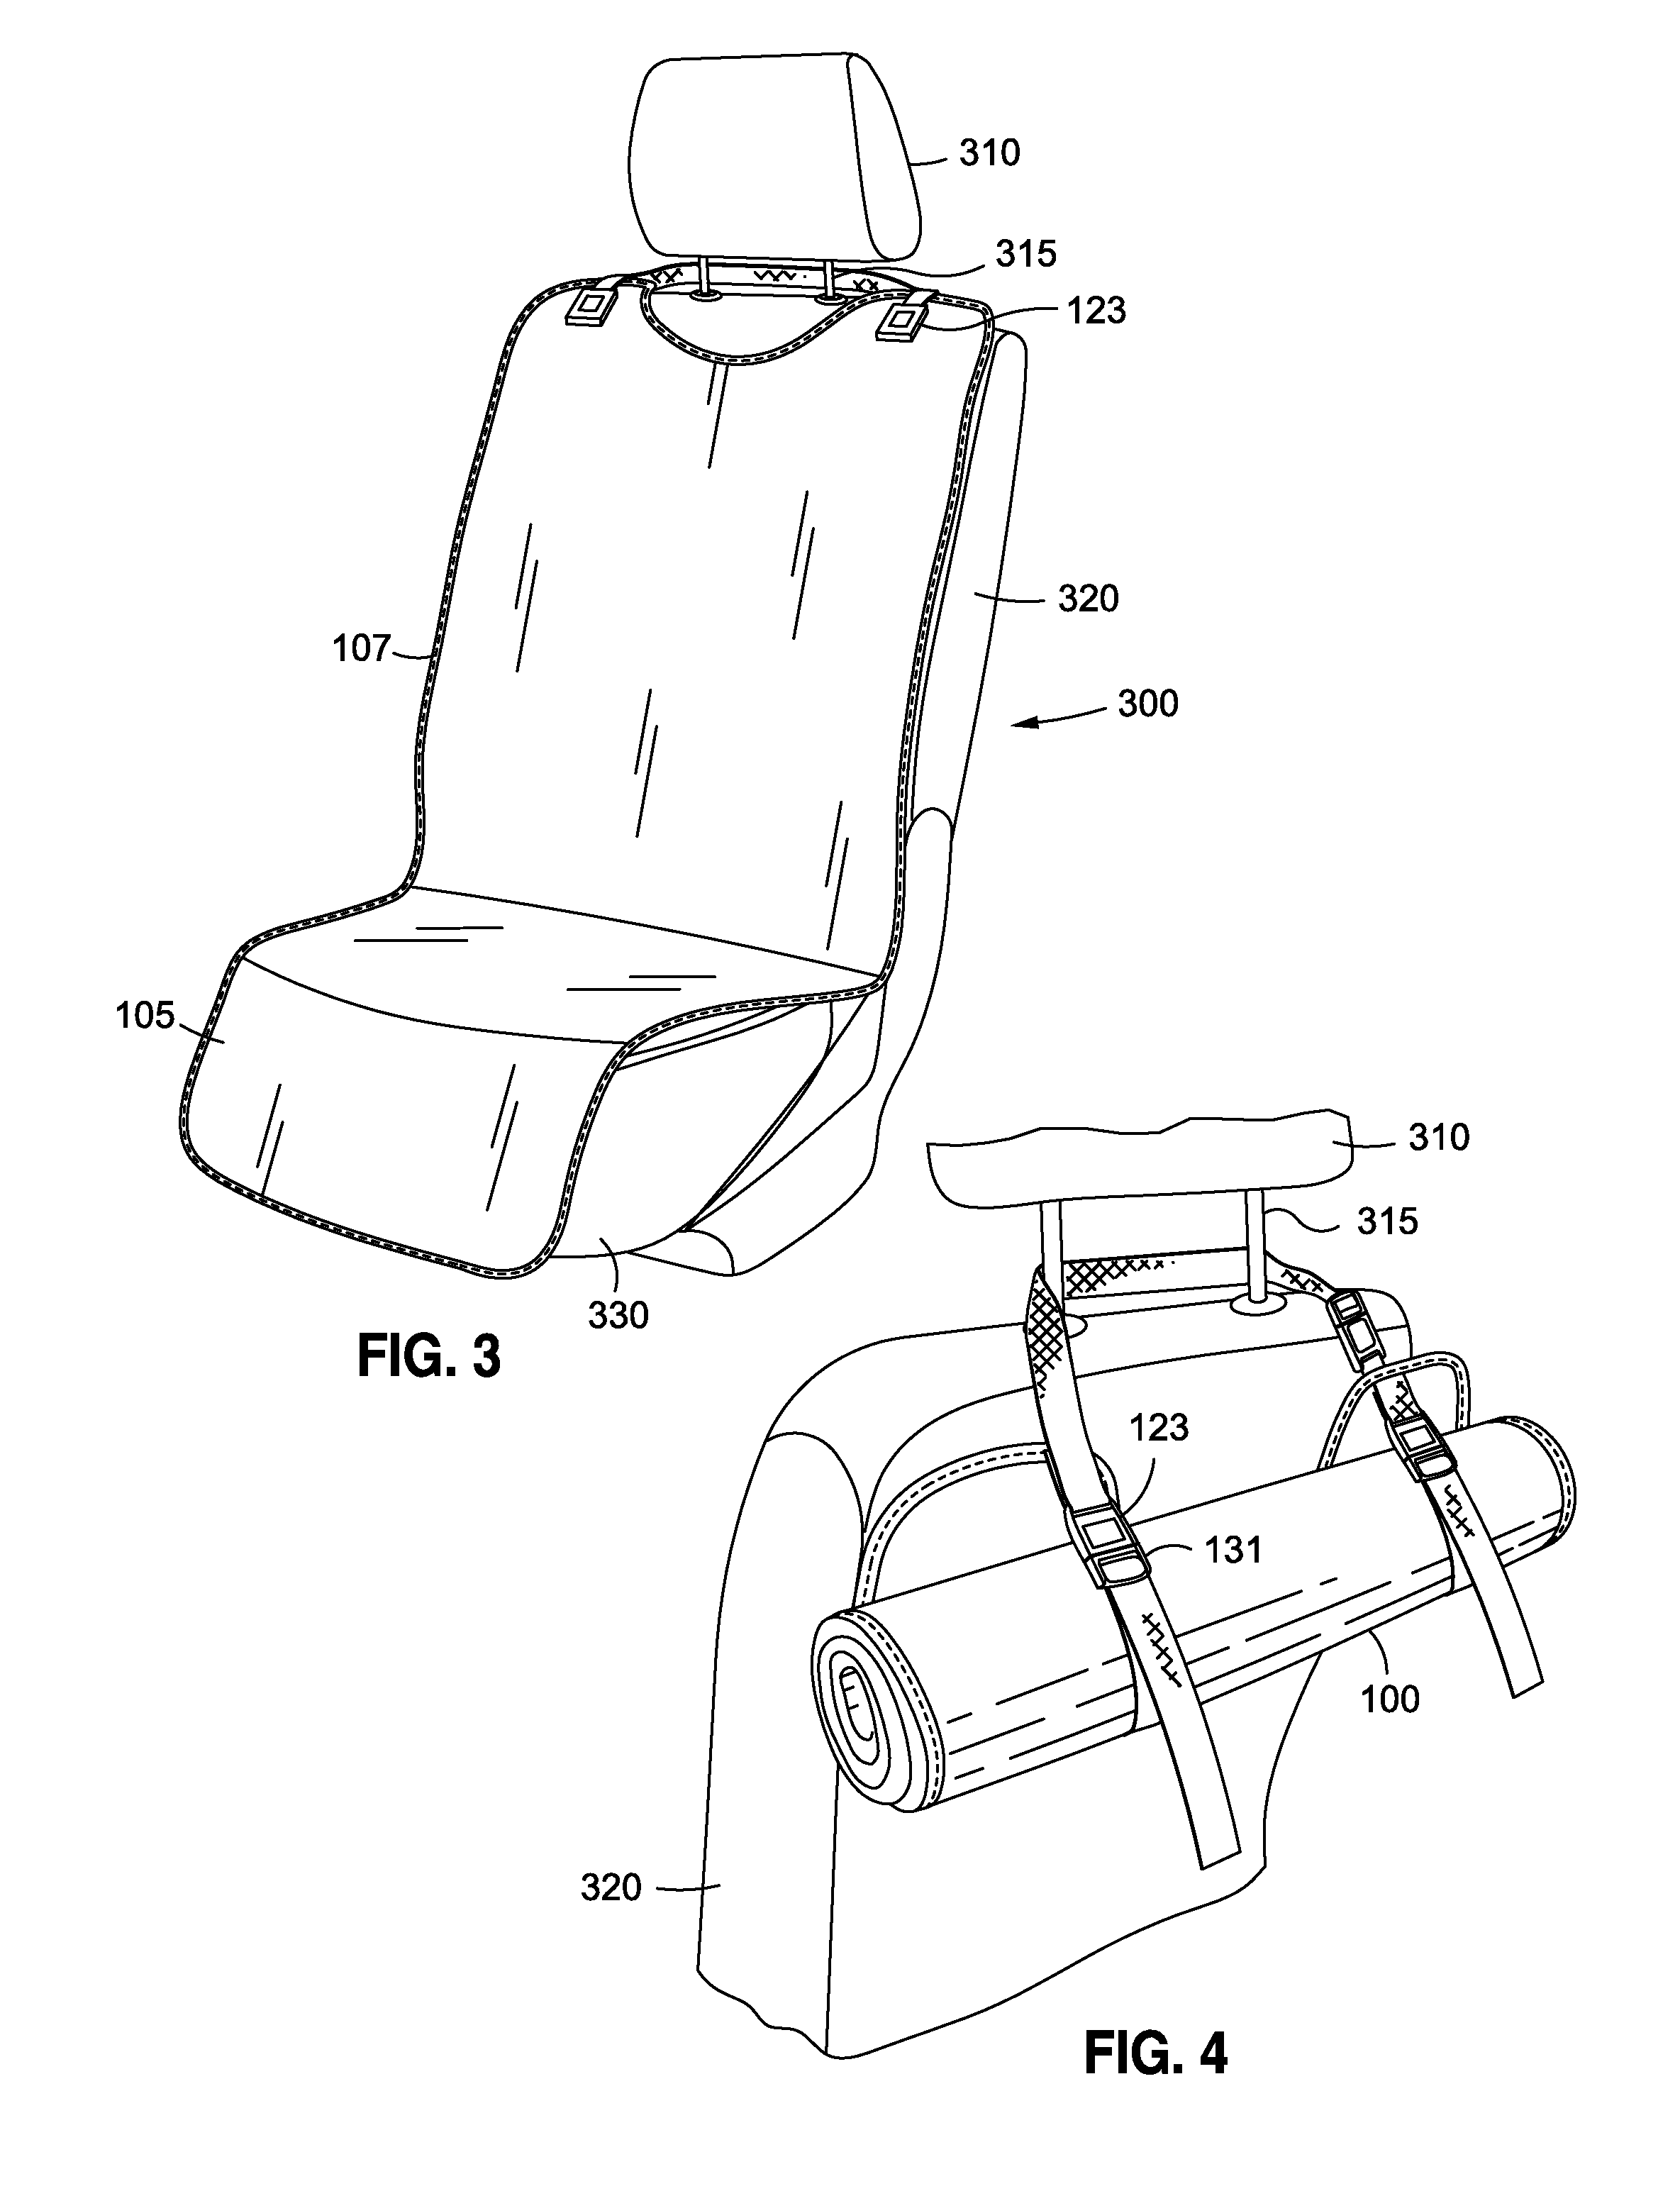 Portable seat protector